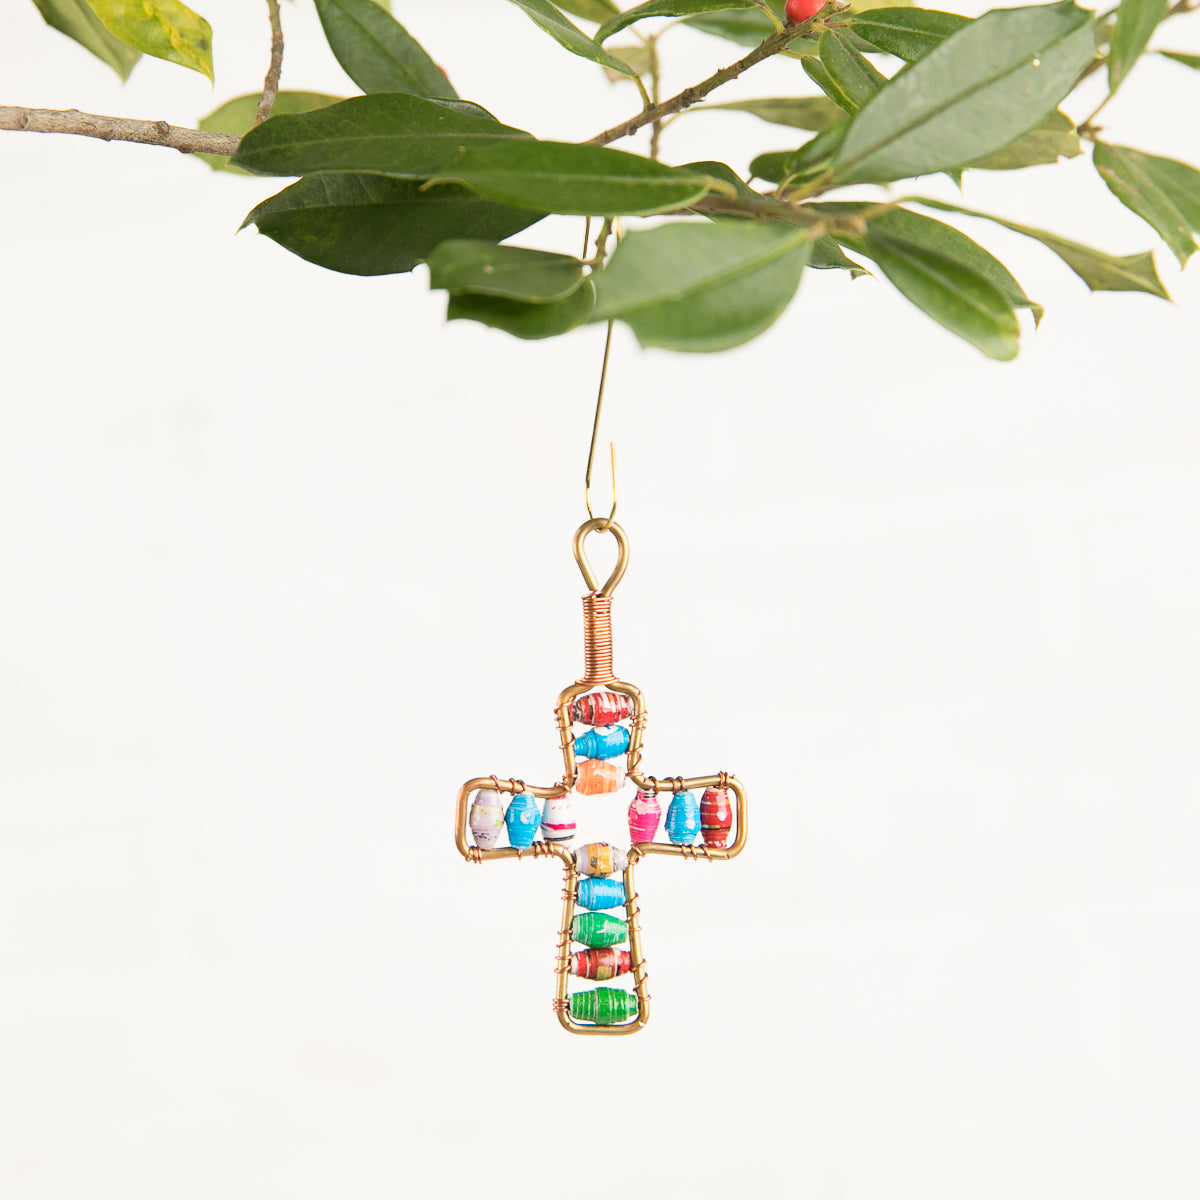 Paper-Beaded Cross Ornament by Ornaments 4 Orphans